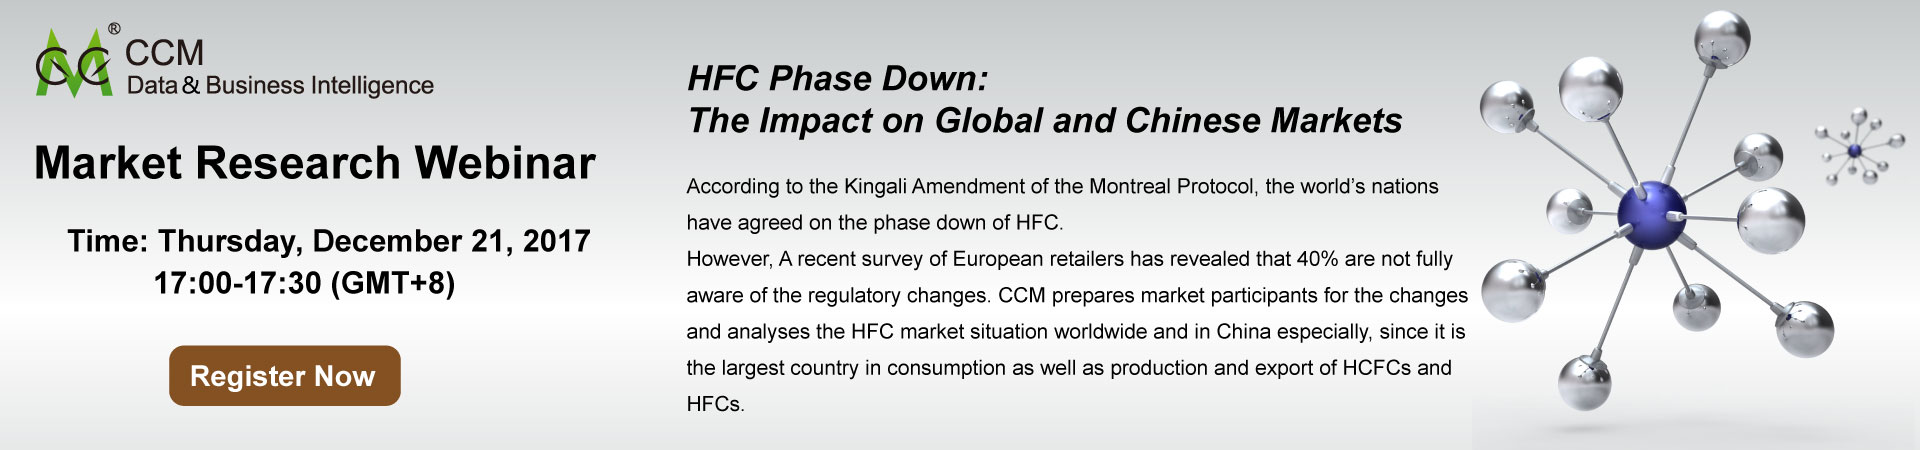 HFC Phase Down: The Impact on Global and Chinese Markets